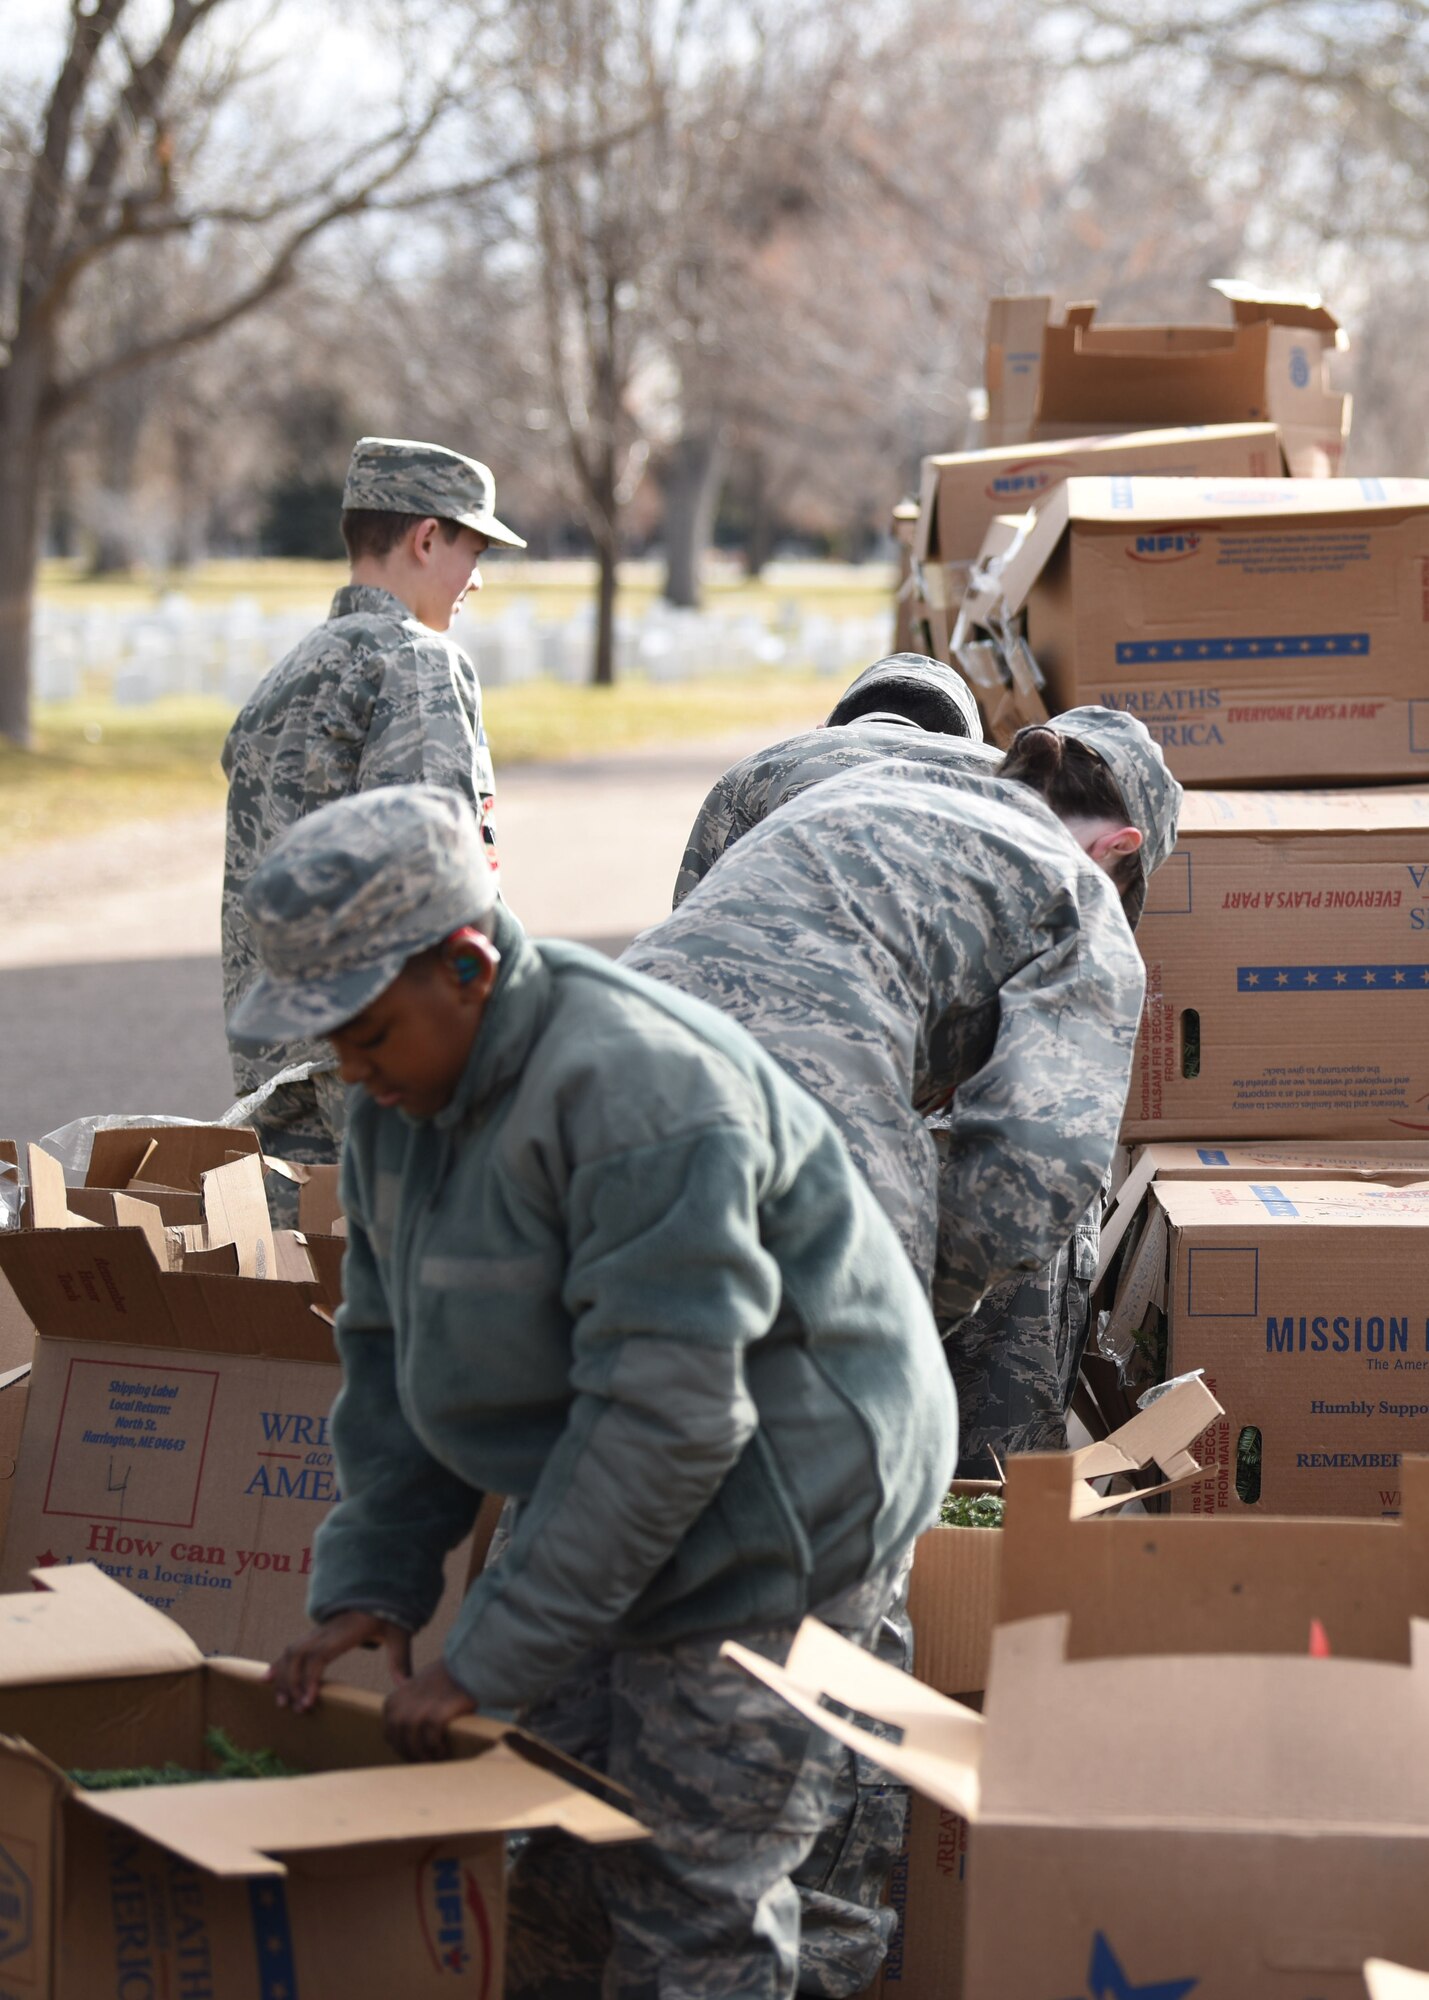 Cadets from Civil Air Patrol Mile High Squadron 143 sort wreaths for the Wreaths Across America event at Fairmount Cemetery in Denver, Dec. 14, 2019.